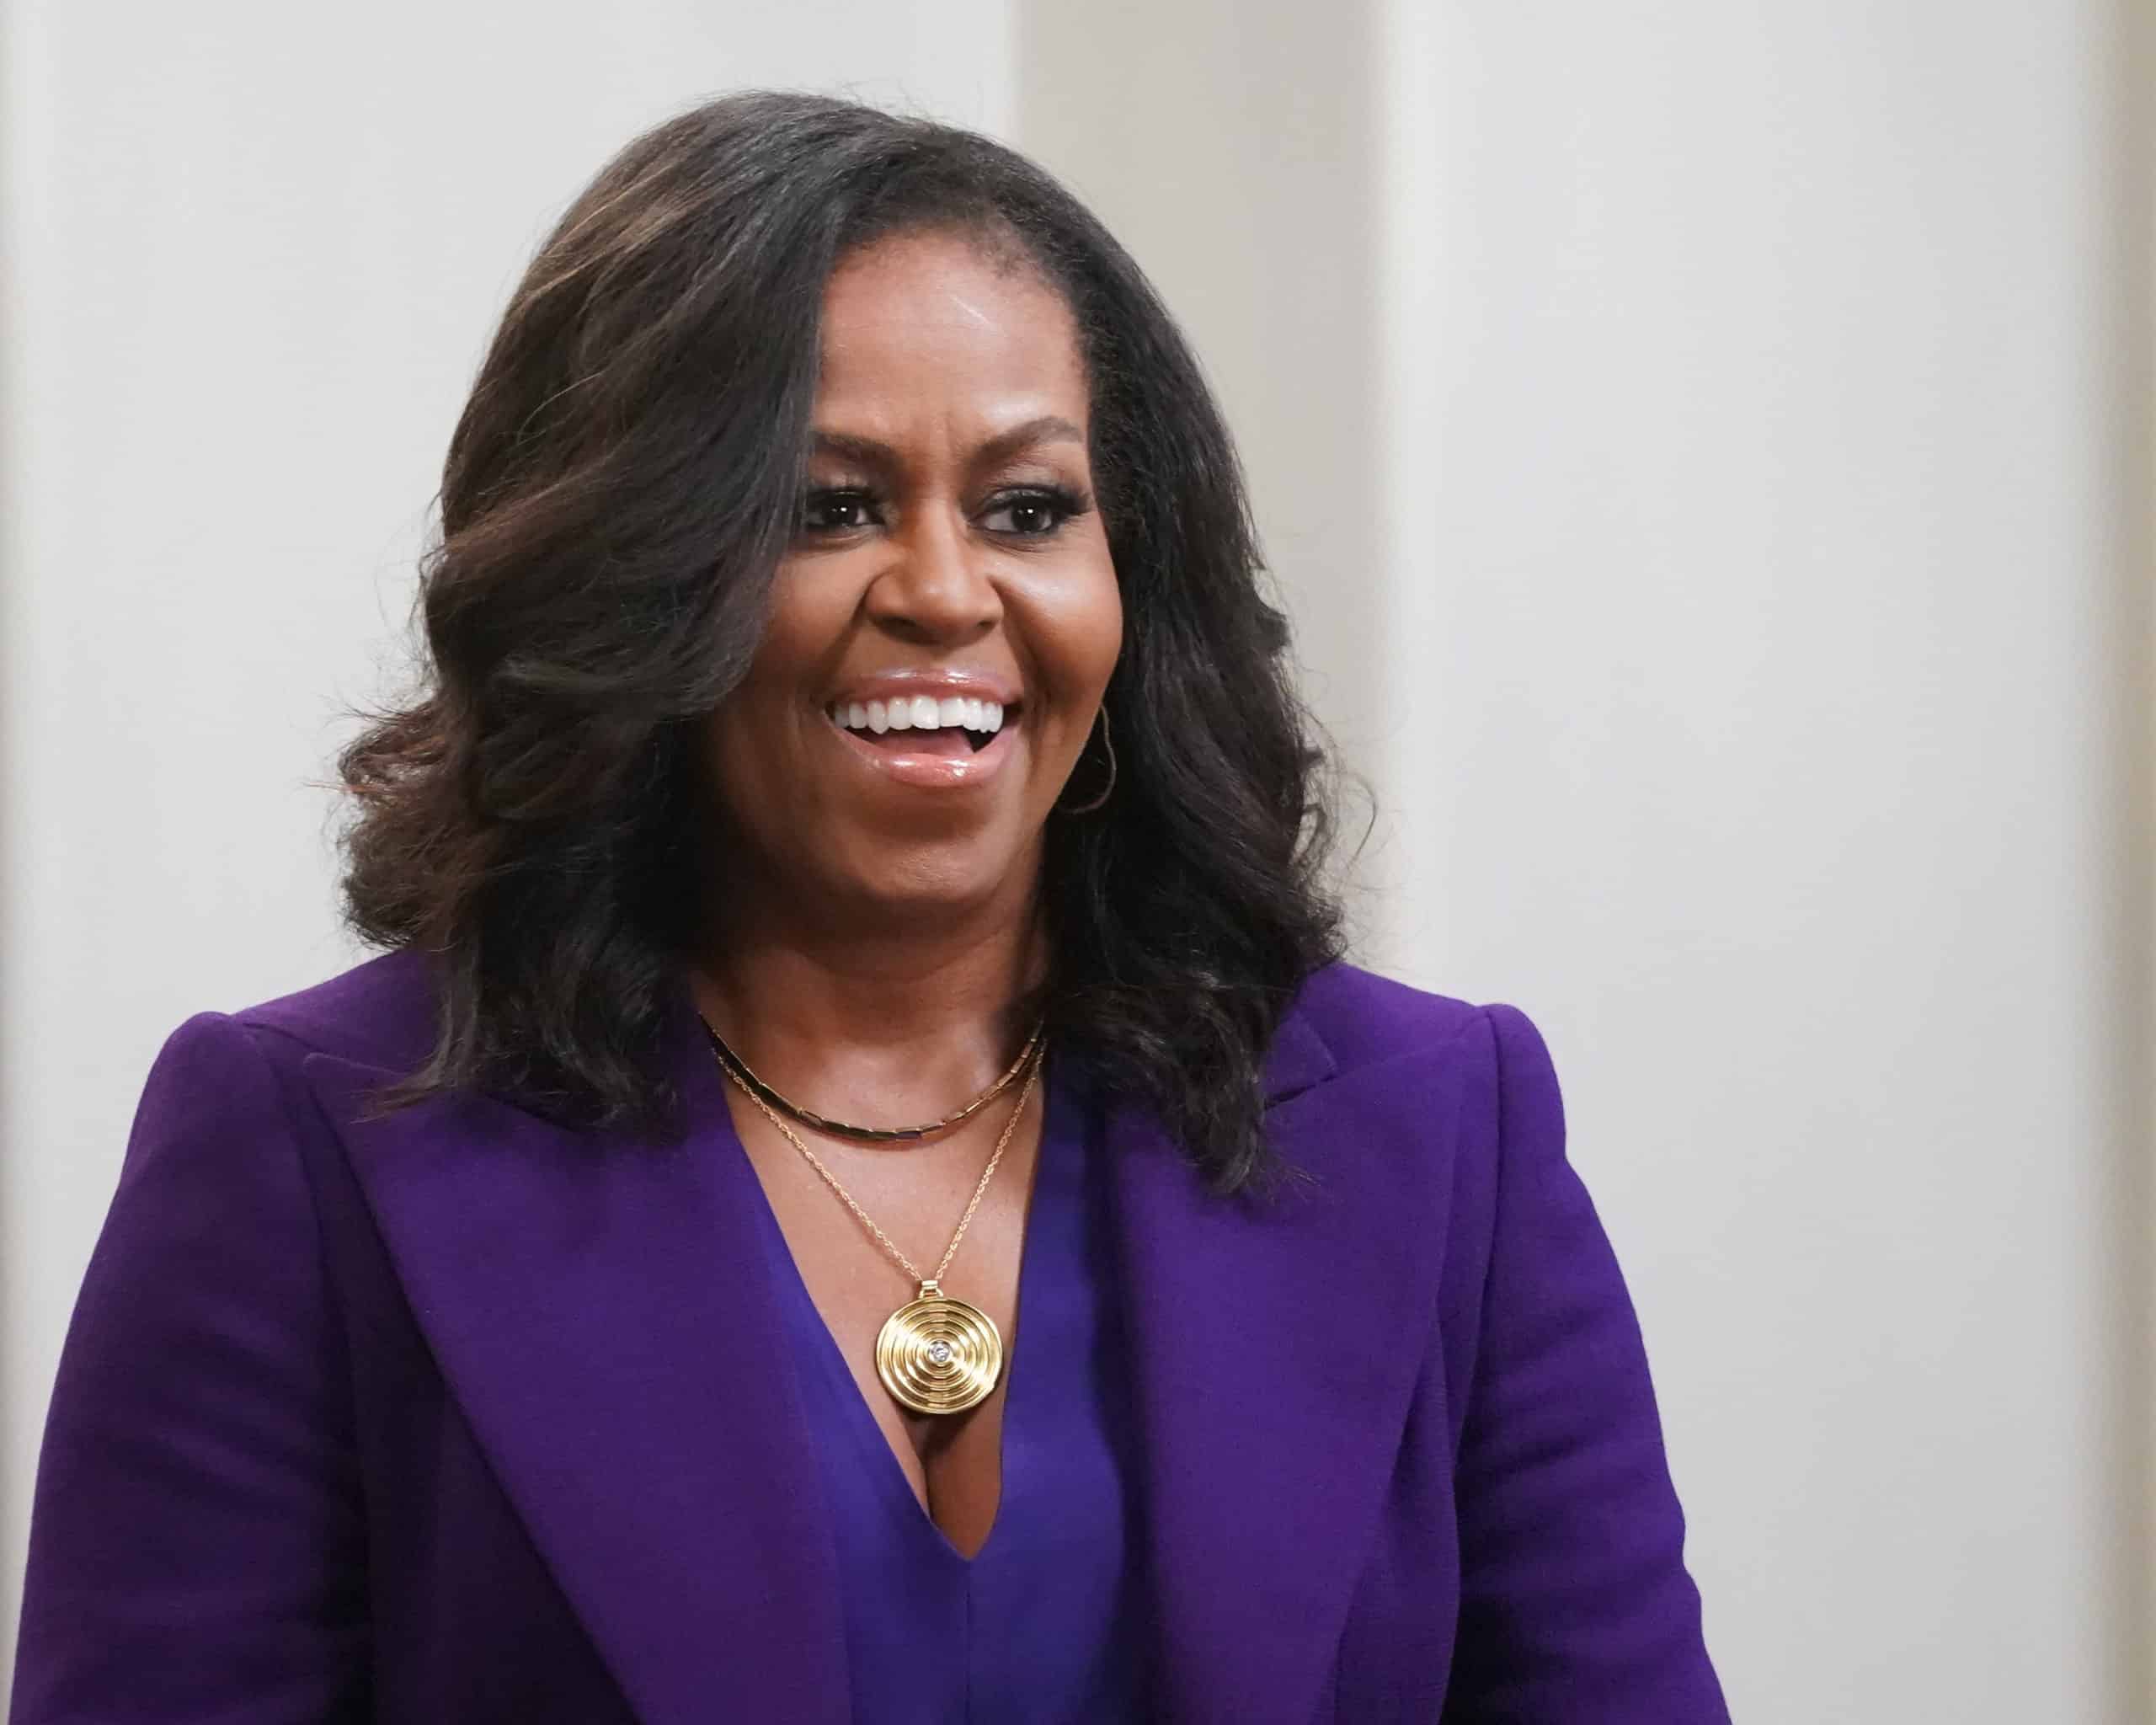 Michelle Obama's Black-ish Appearance Photos Released